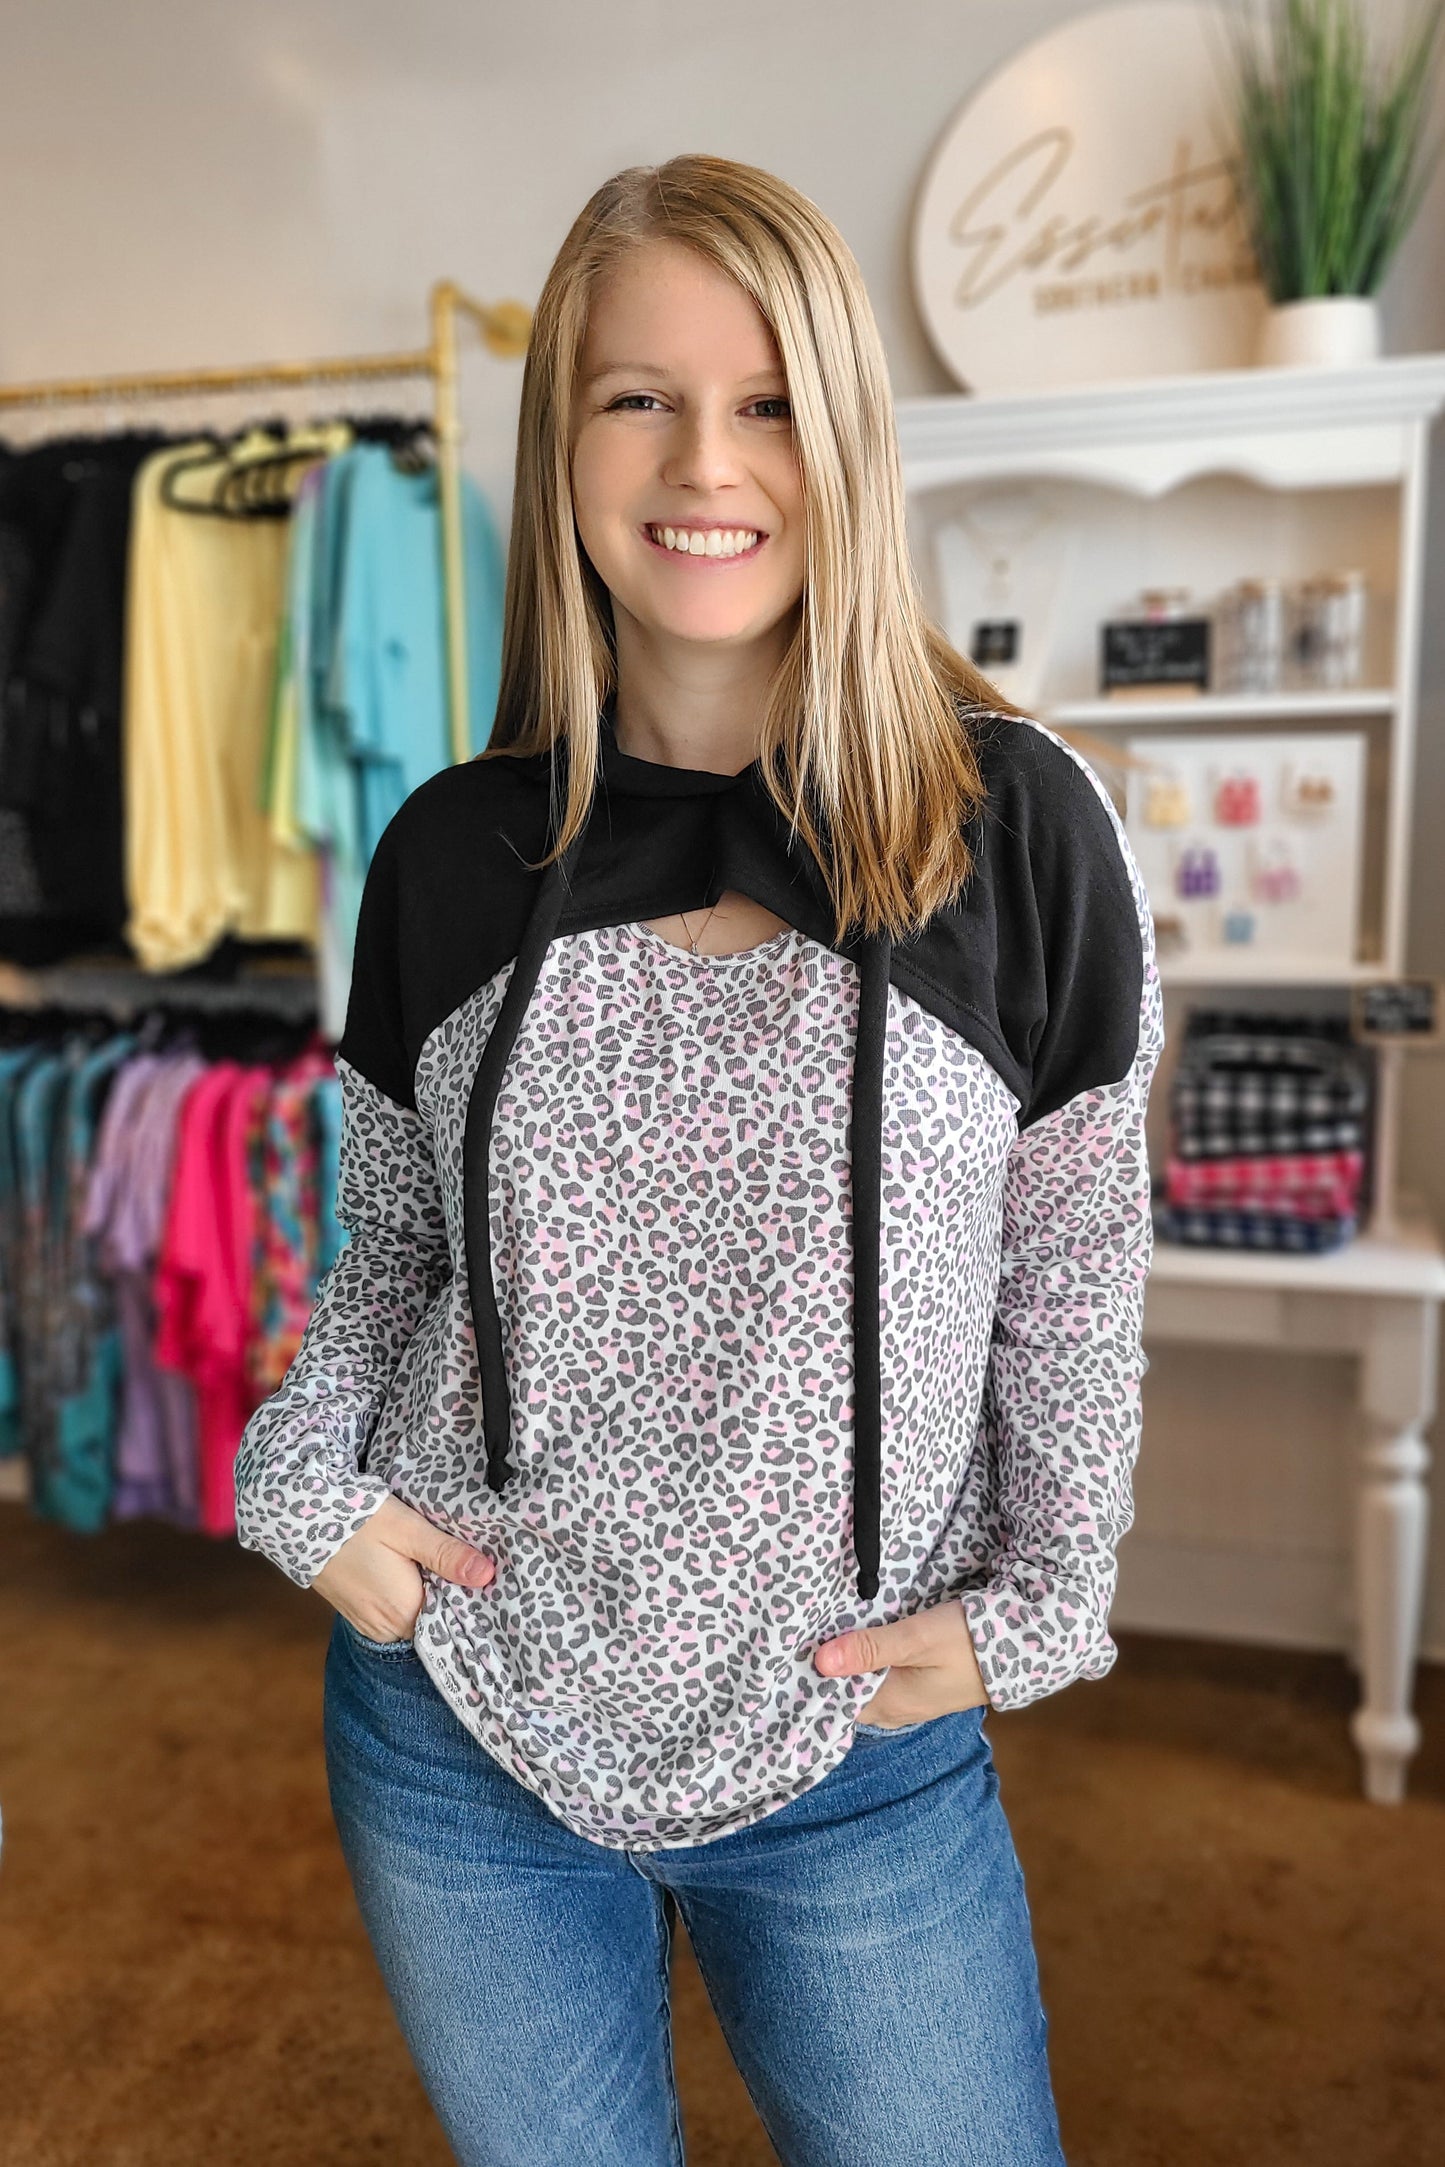 Peek a Boo Pink Leopard Top - Essential Southern Charm